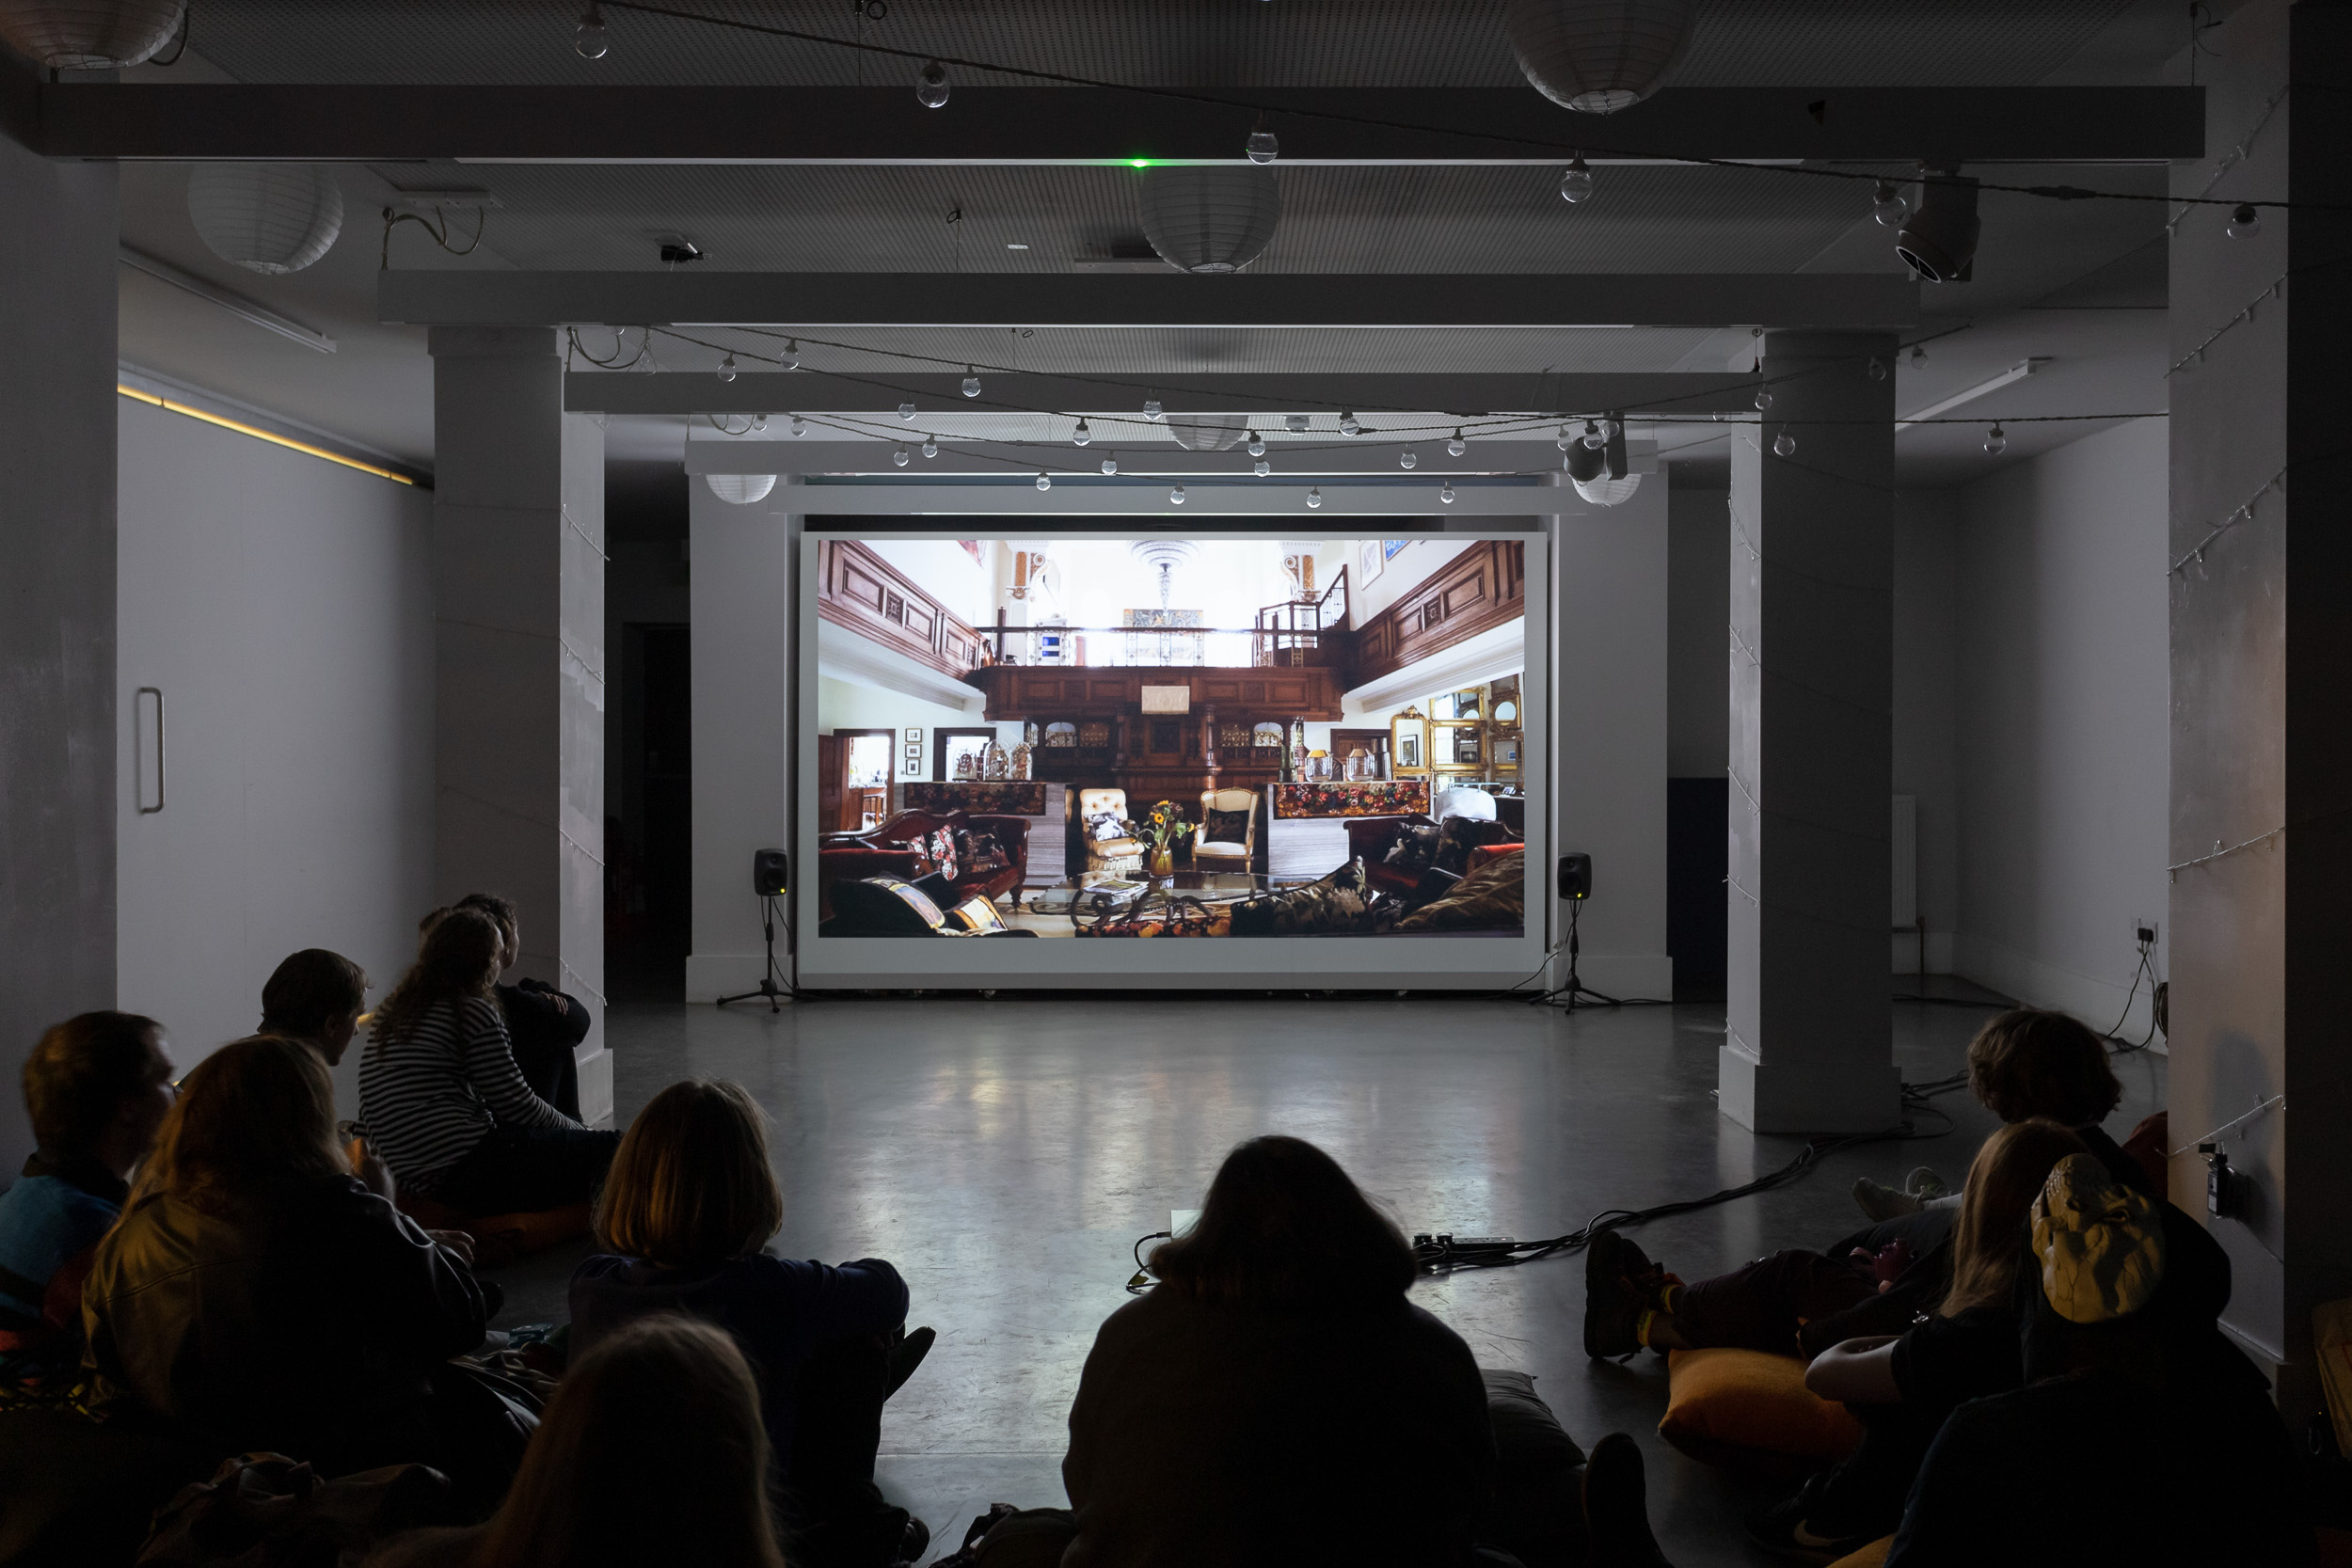 A film being screened in a gallery, with people gathered around to watch. On screen is a room filled with wooden furniture.